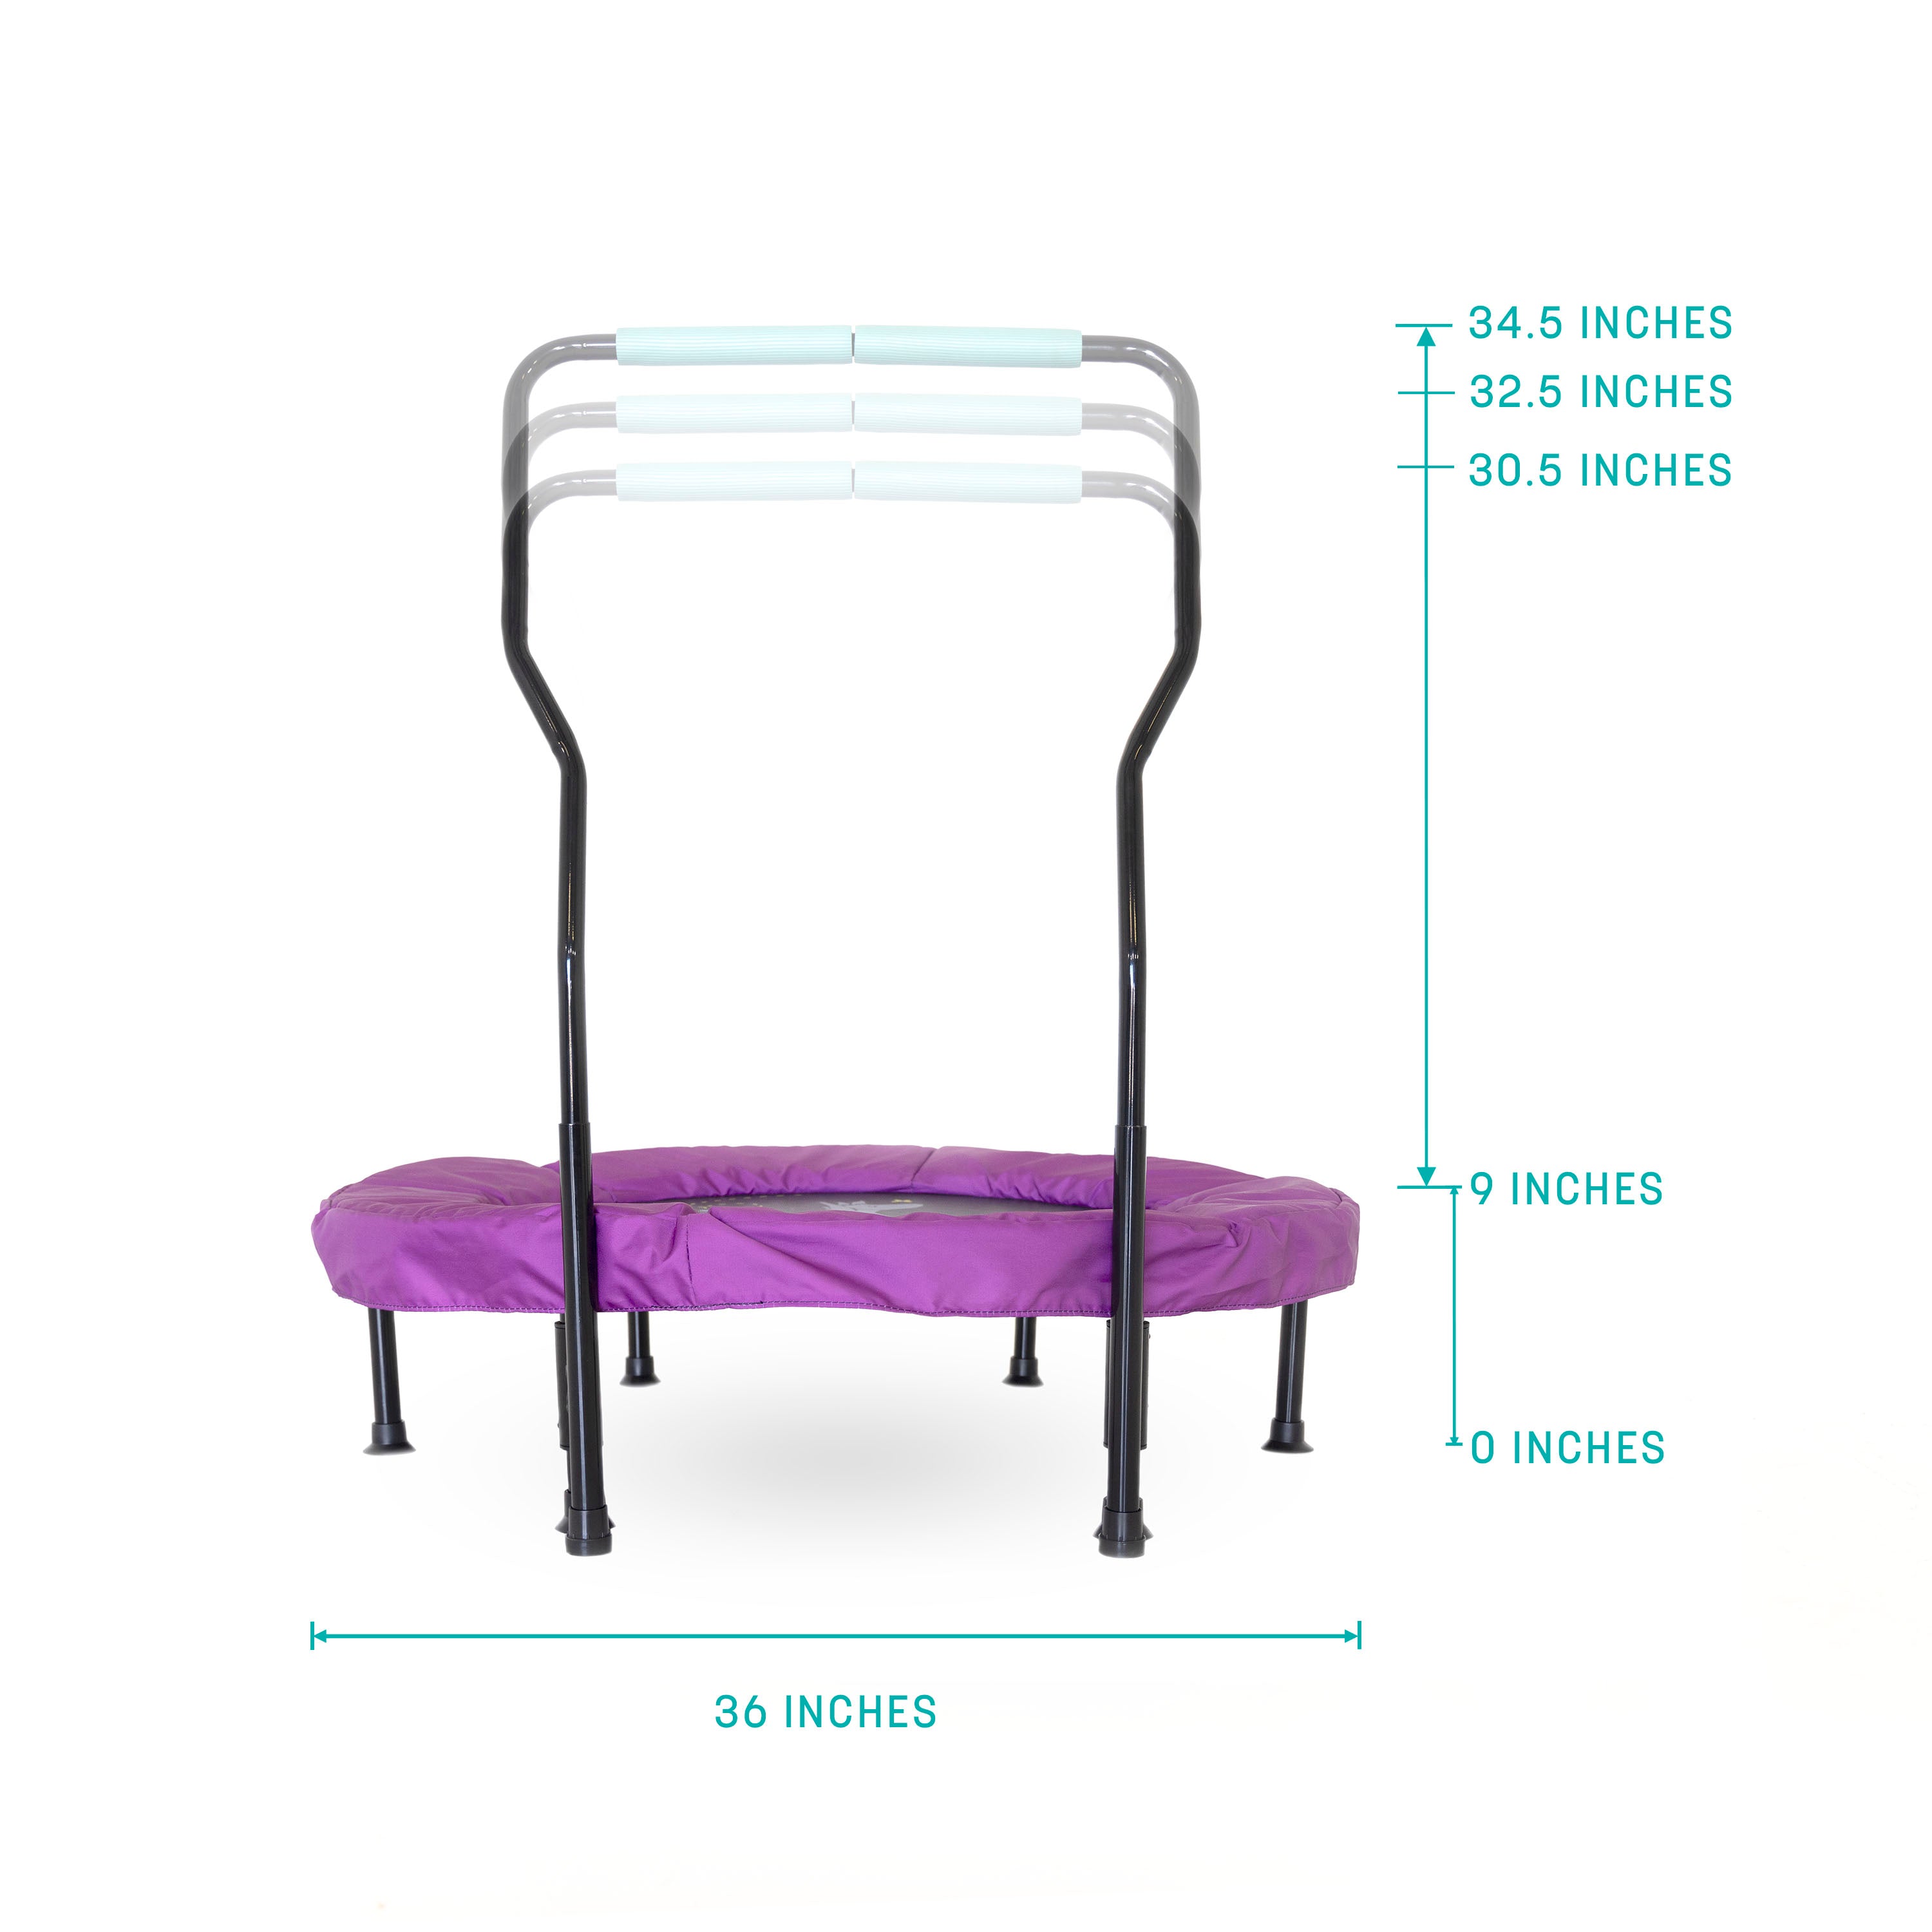 The Eeyore toddler trampoline is 36” wide and 9” tall from the ground to the top of the frame. The handlebar has adjustable settings that range from 30.5” to 34.5” tall. 